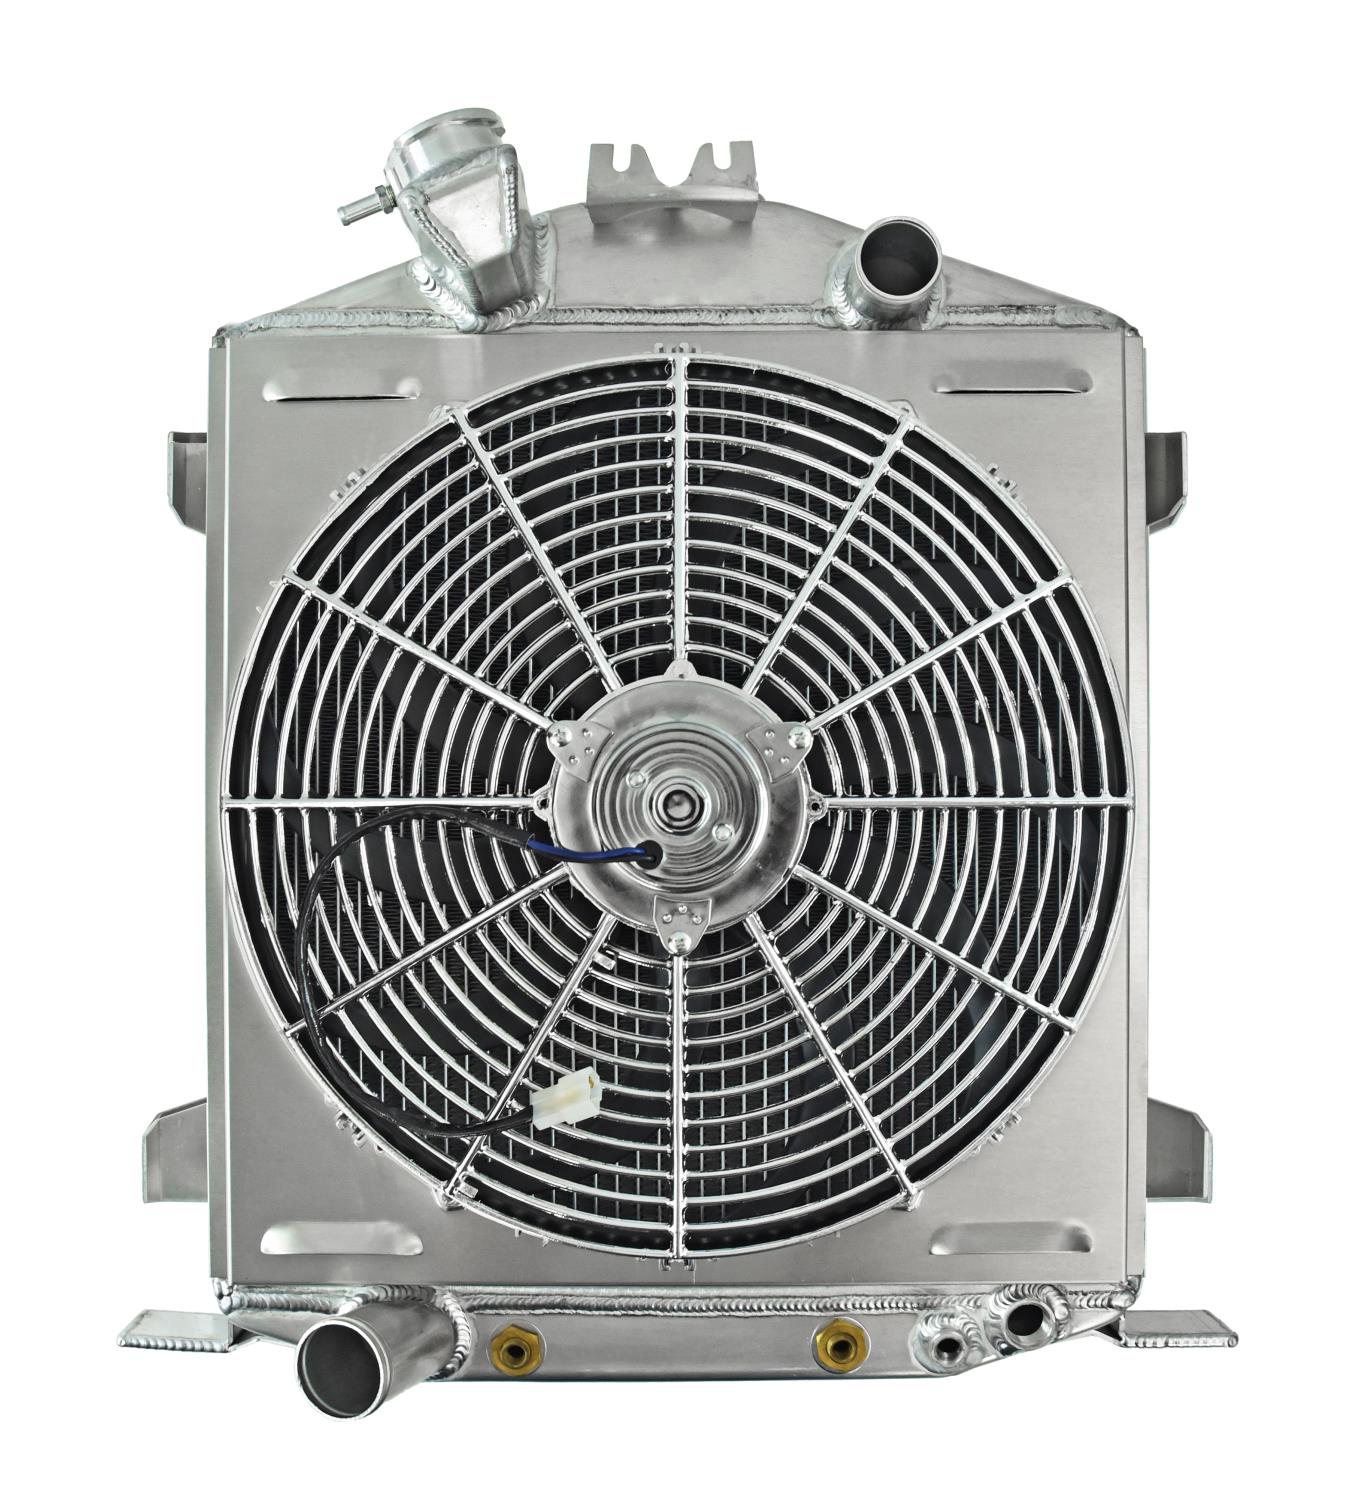 Aluminum Radiator & Fan Combo for 1932 Ford LO-BOY with Ford V8 Engine and Chopped Grill [16 in. Fan]